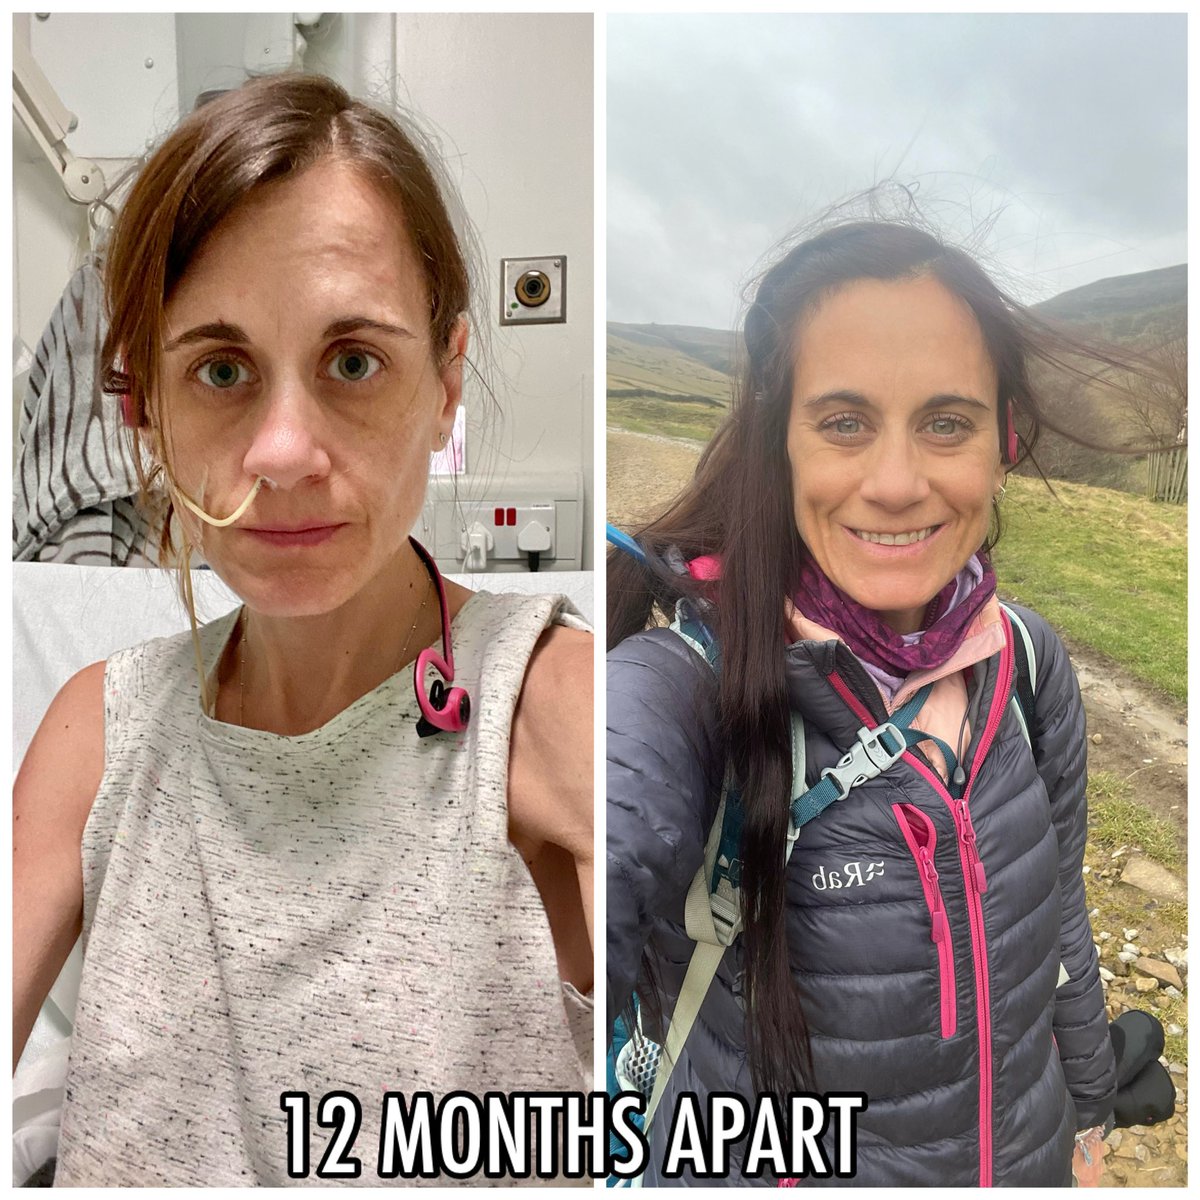 1 year ago I was admitted to The Priory Cheadle unwell with anorexia. I still have a long way to go in recovery, but 365 days on, I celebrated this recovery-milestone with a windy hike in the Peak District! #recovery #anorexiarecovery #eatingdisorders #PeakDistrict #mentalhealth